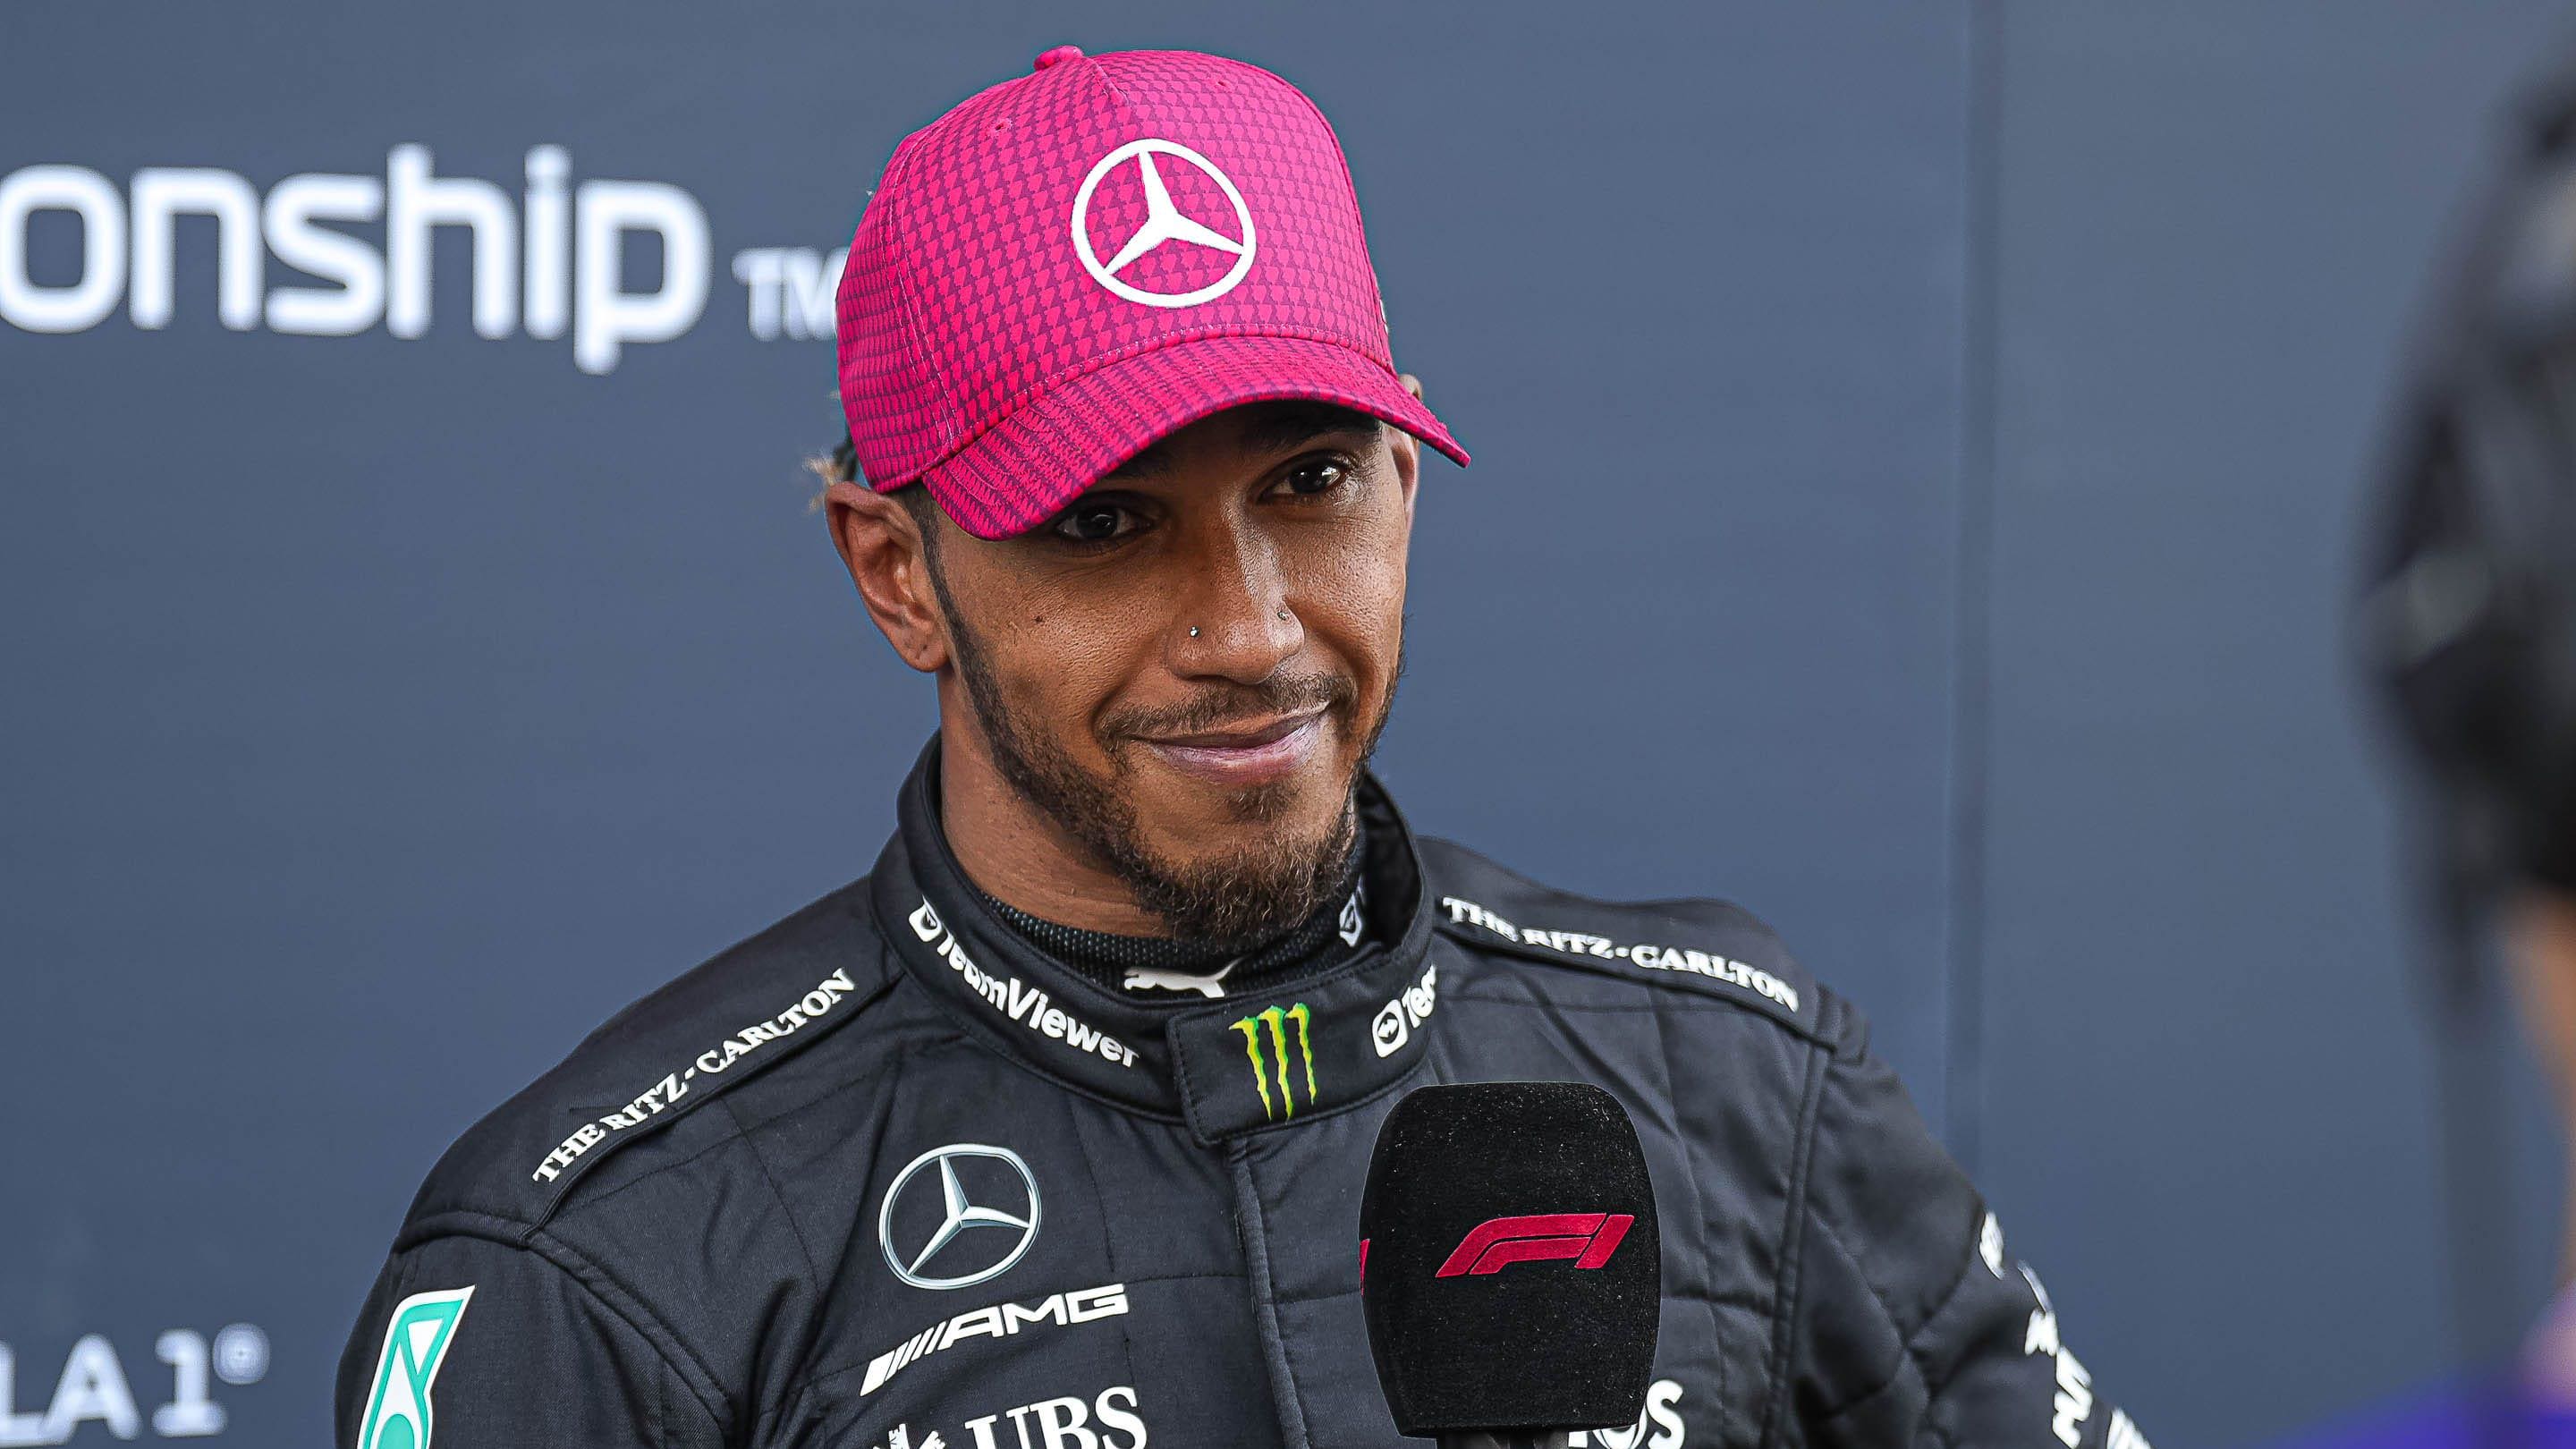 Mercedes AMG Petronas driver Lewis Hamilton is interviewed after qualifying at Circuit of Americas